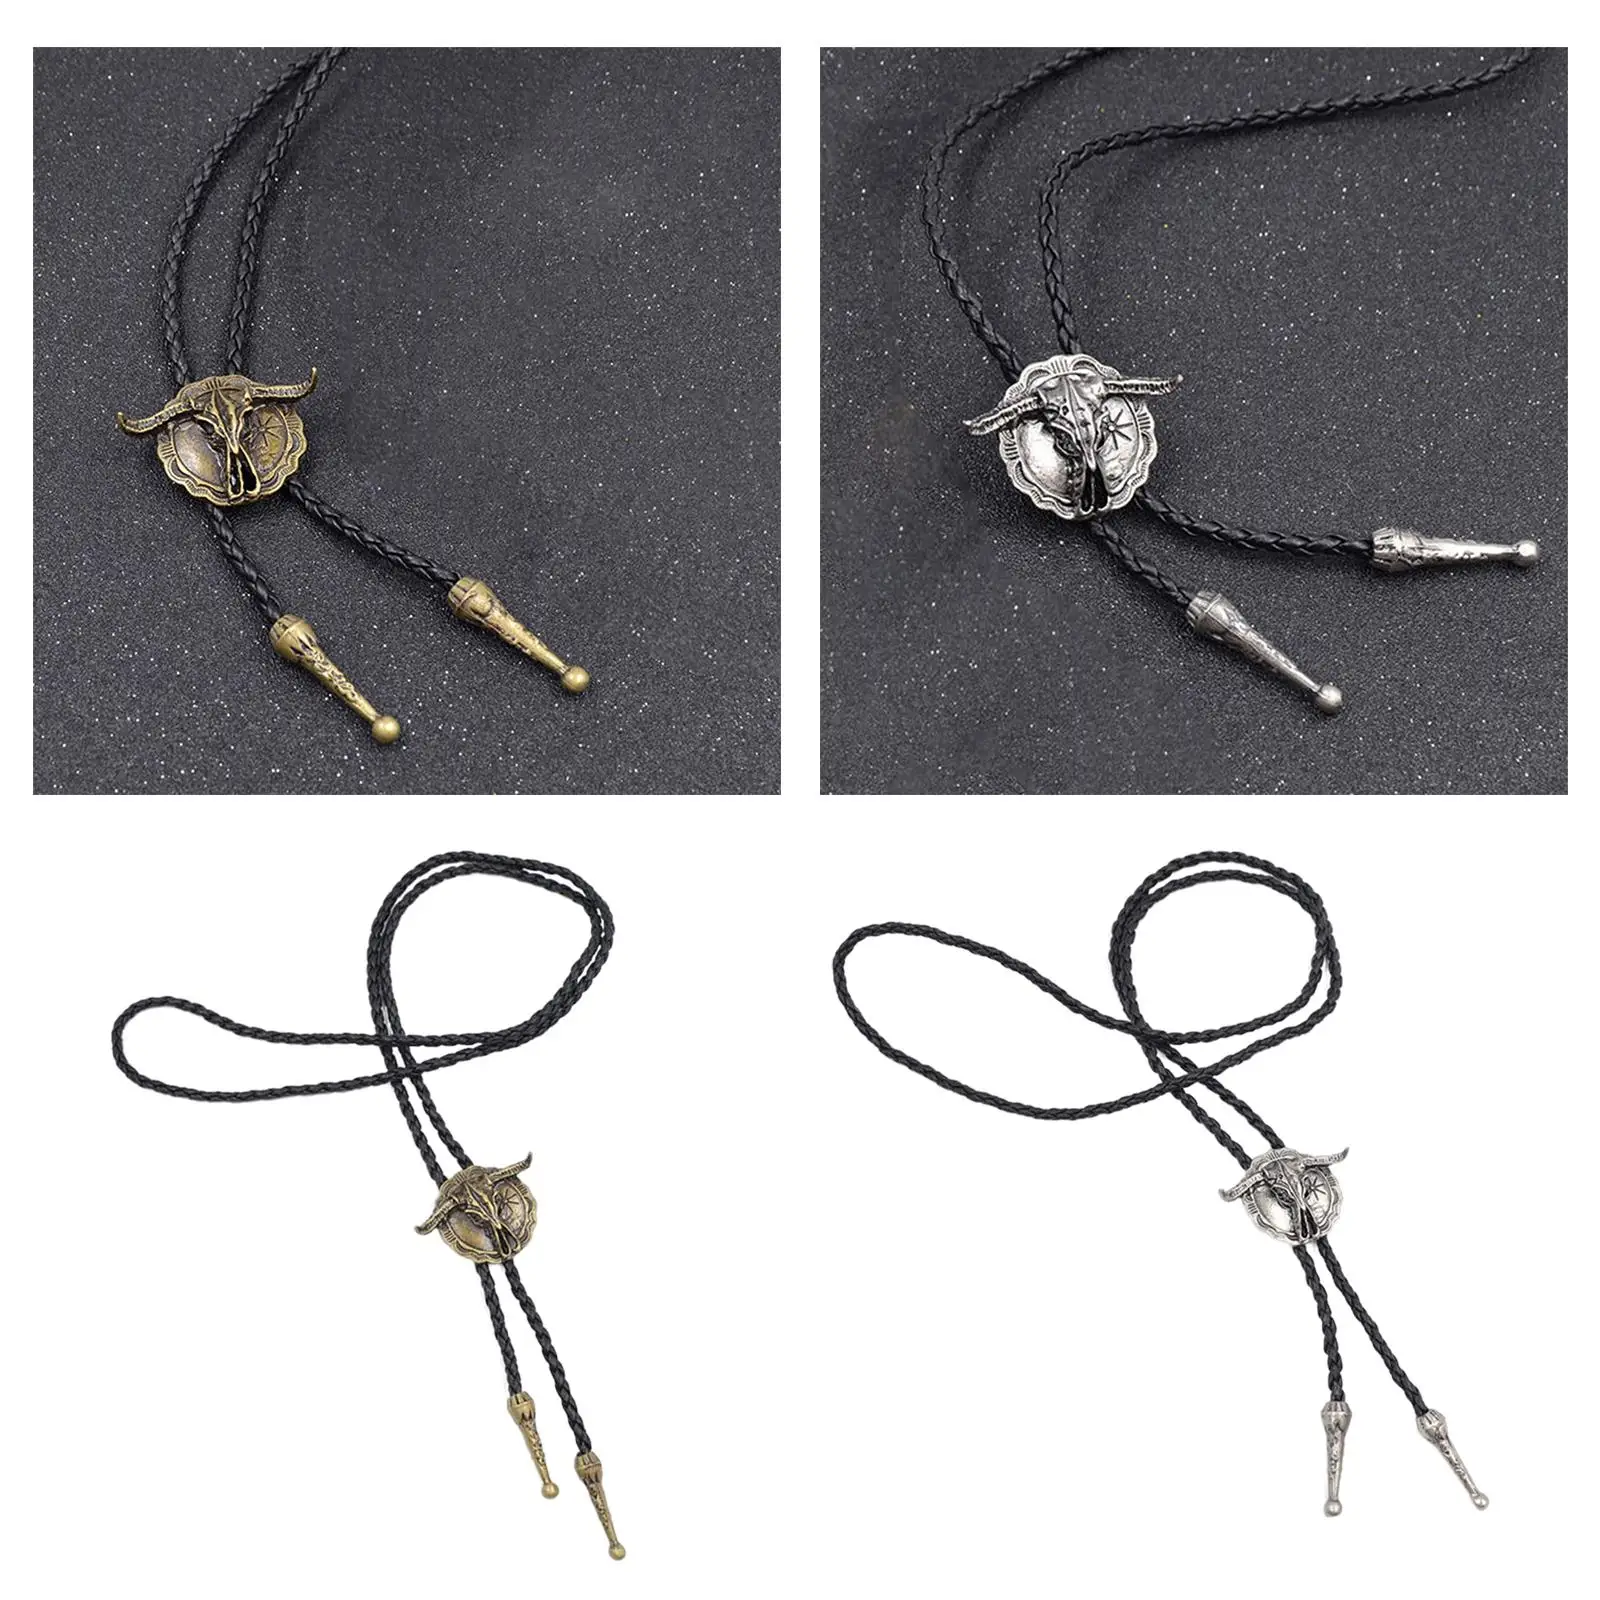 Bolo Tie with Hand Braided Lanyard Special Apparel Accessory Durable Premium Grade Adjustable Size Trendy Style for Men Jewelry